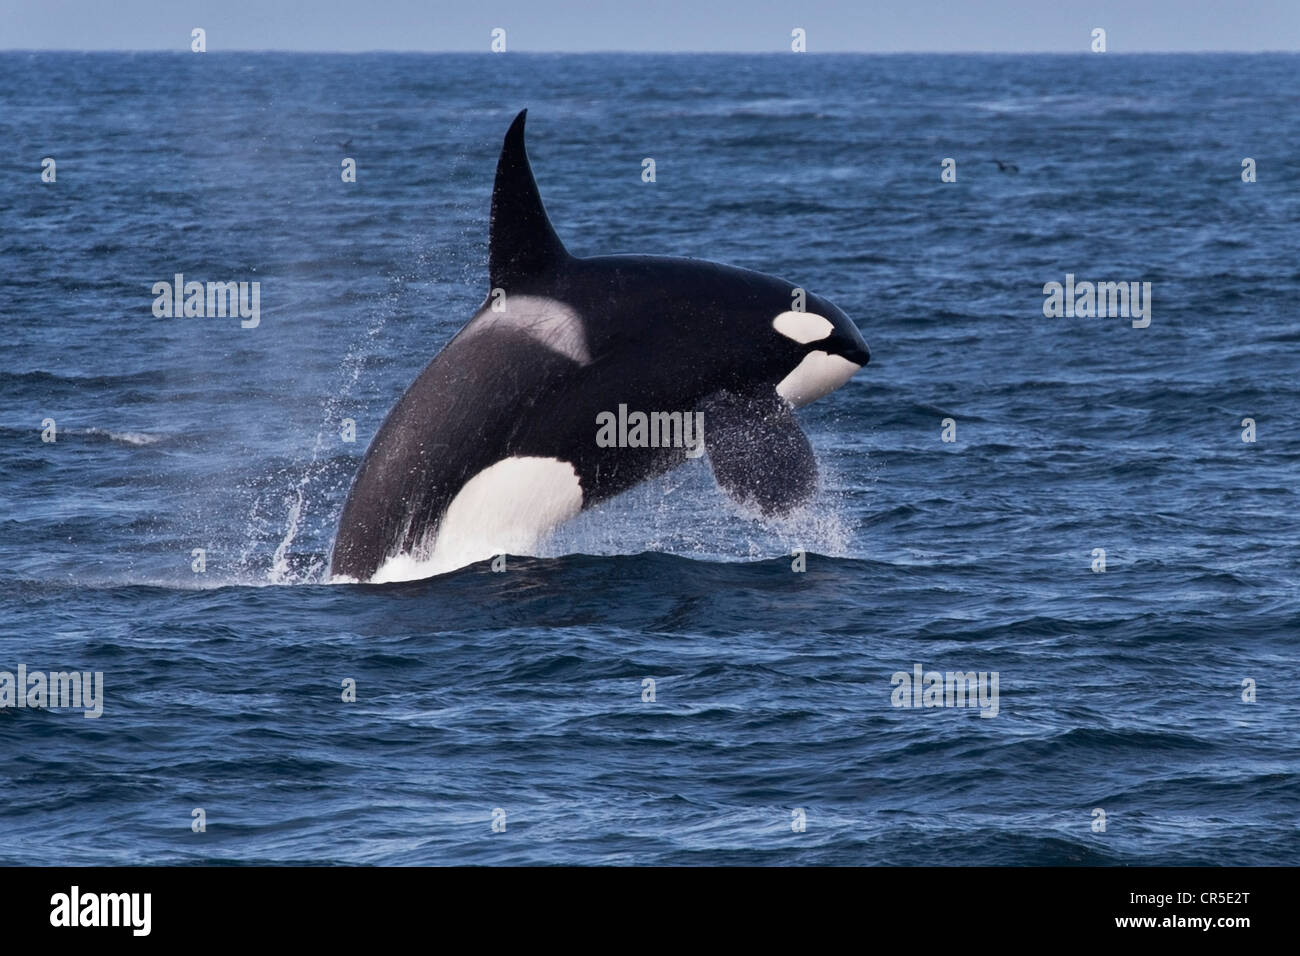 Transient Killer Whale/Orca (Orcinus orca). Large adult male breaching, Monterey, California, Pacific Ocean. Stock Photo